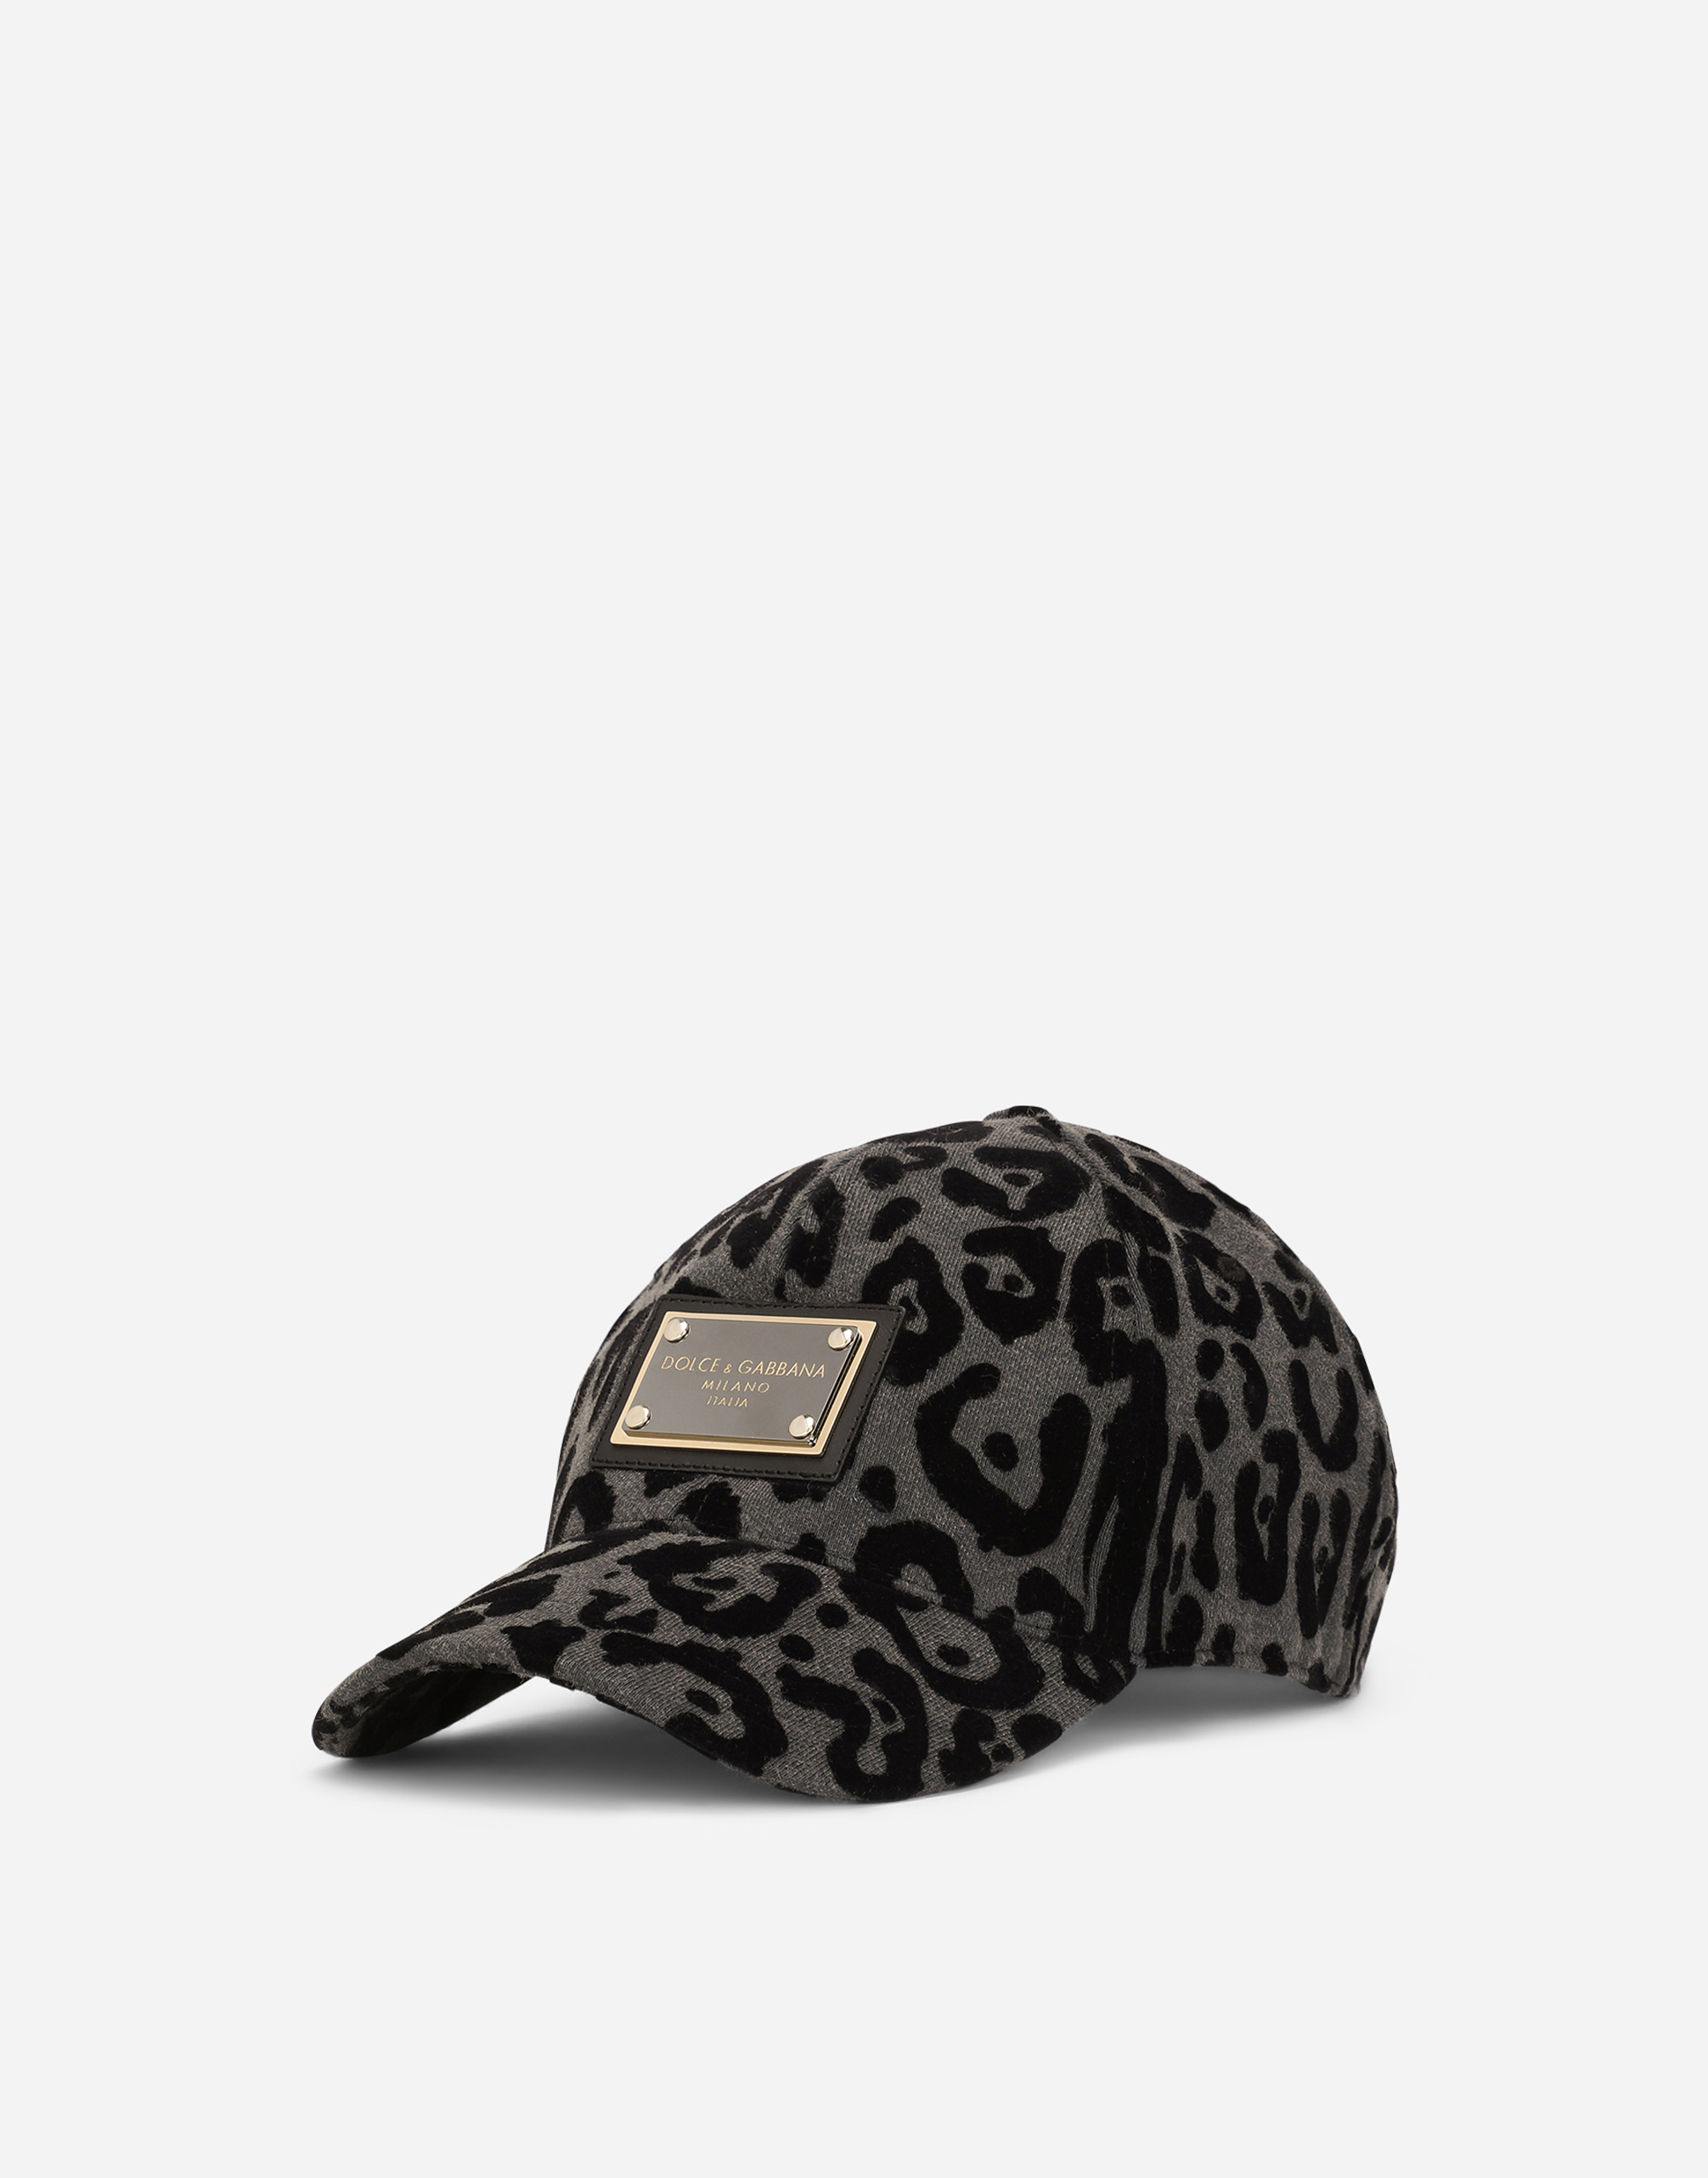 Baseball cap with flocked leopard print in Multicolor